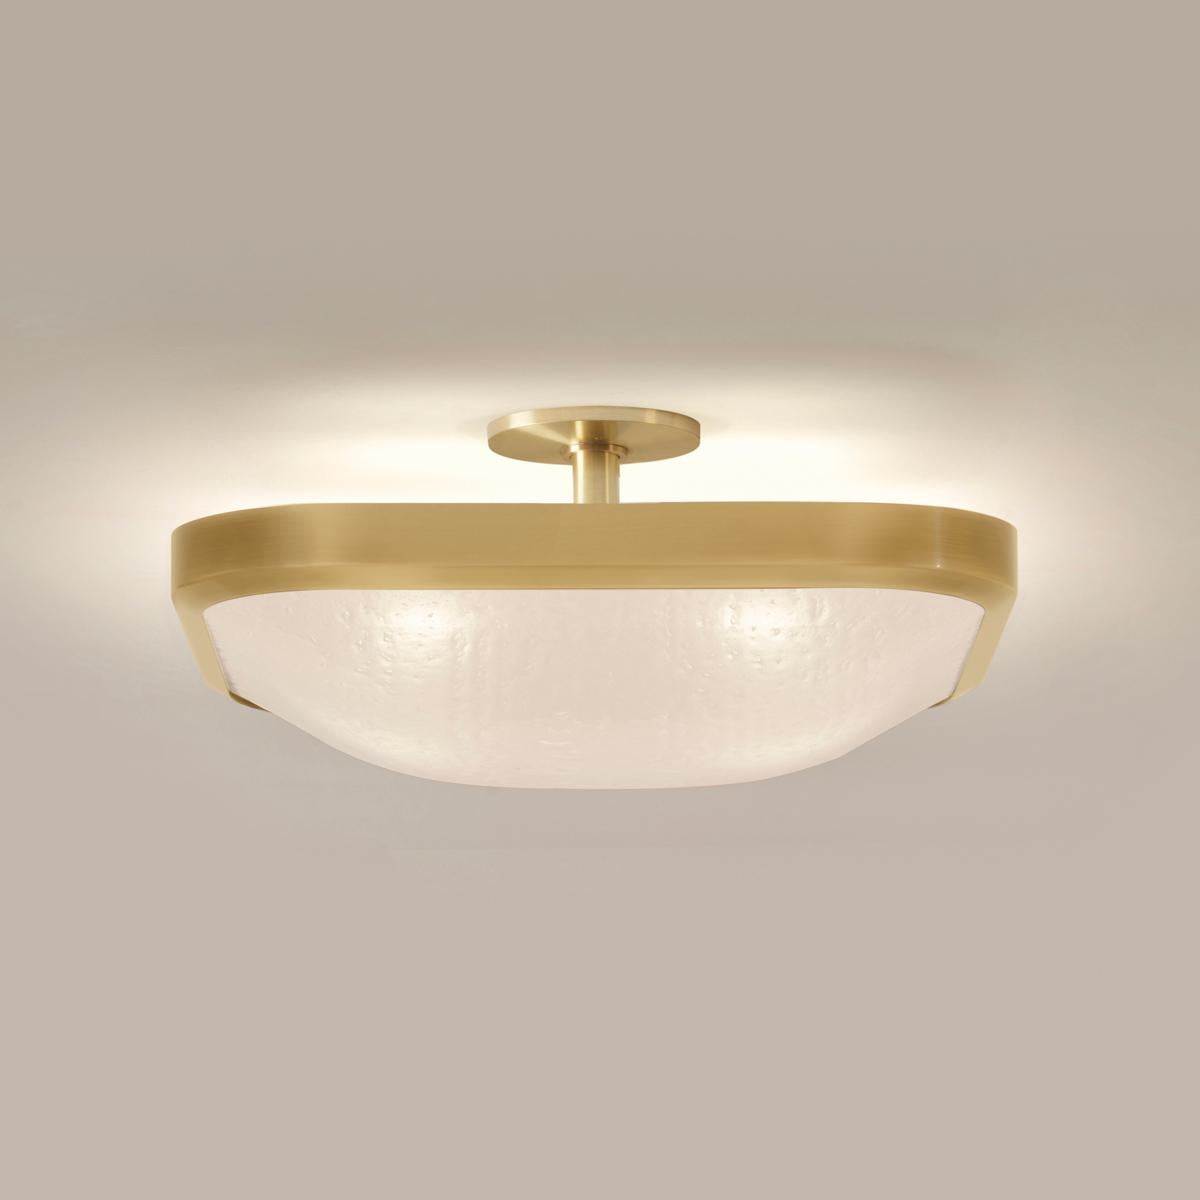 Contemporary Uno Square Ceiling Light by Gaspare Asaro-Polished Nickel Finish For Sale